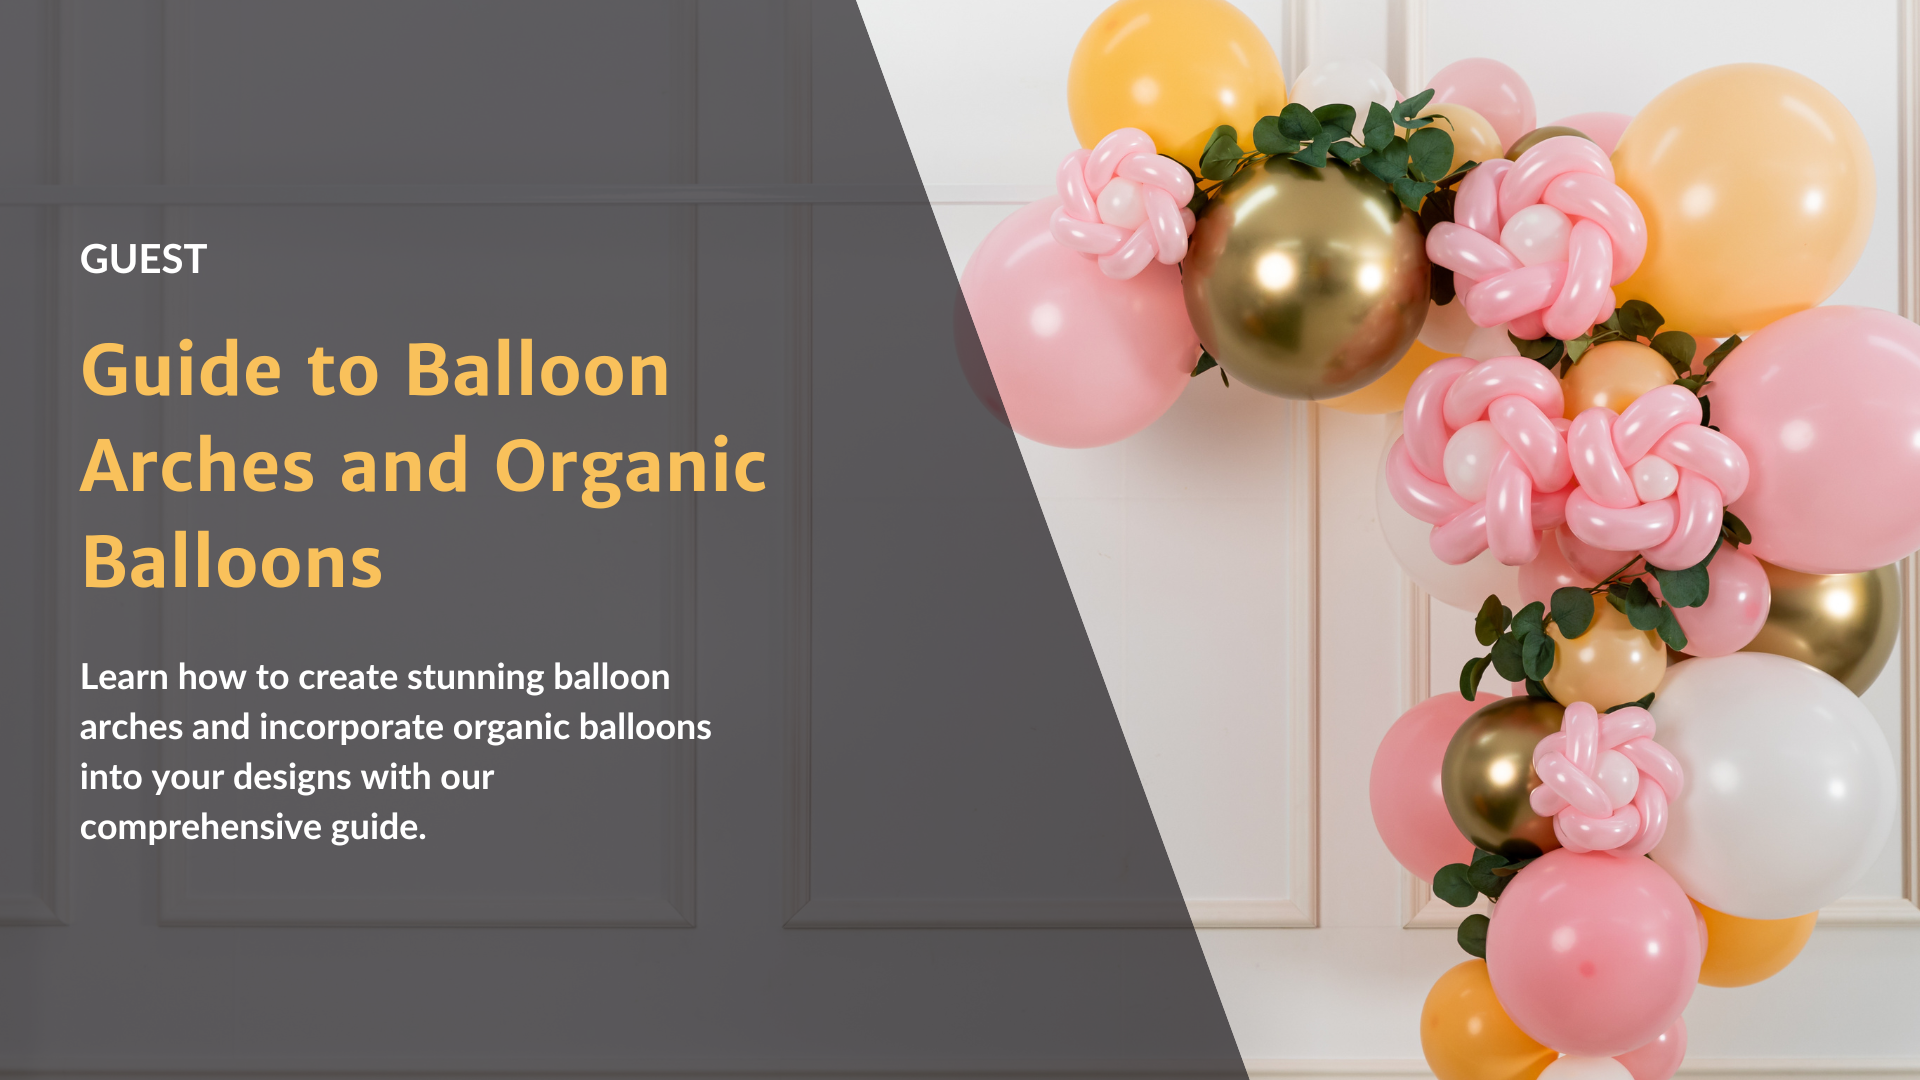 a guide to balloon arches and organic balloons